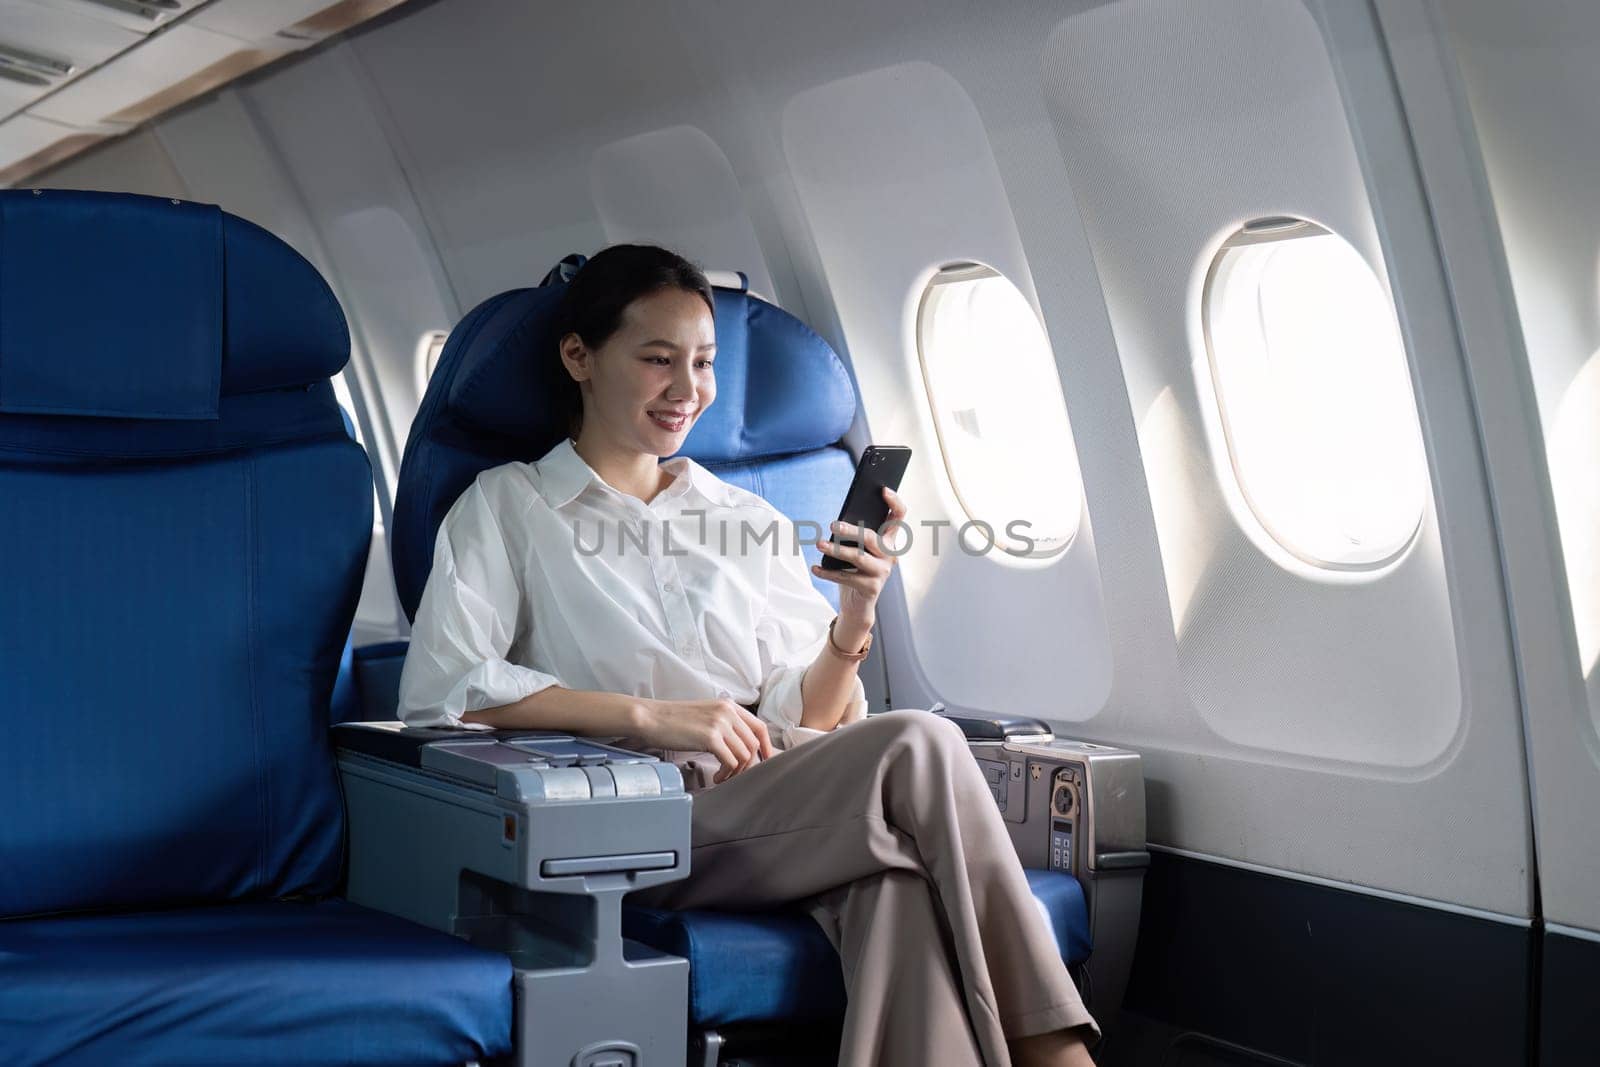 A woman is sitting in an airplane seat with a cell phone in her hand. She is smiling and she is enjoying her time on the plane